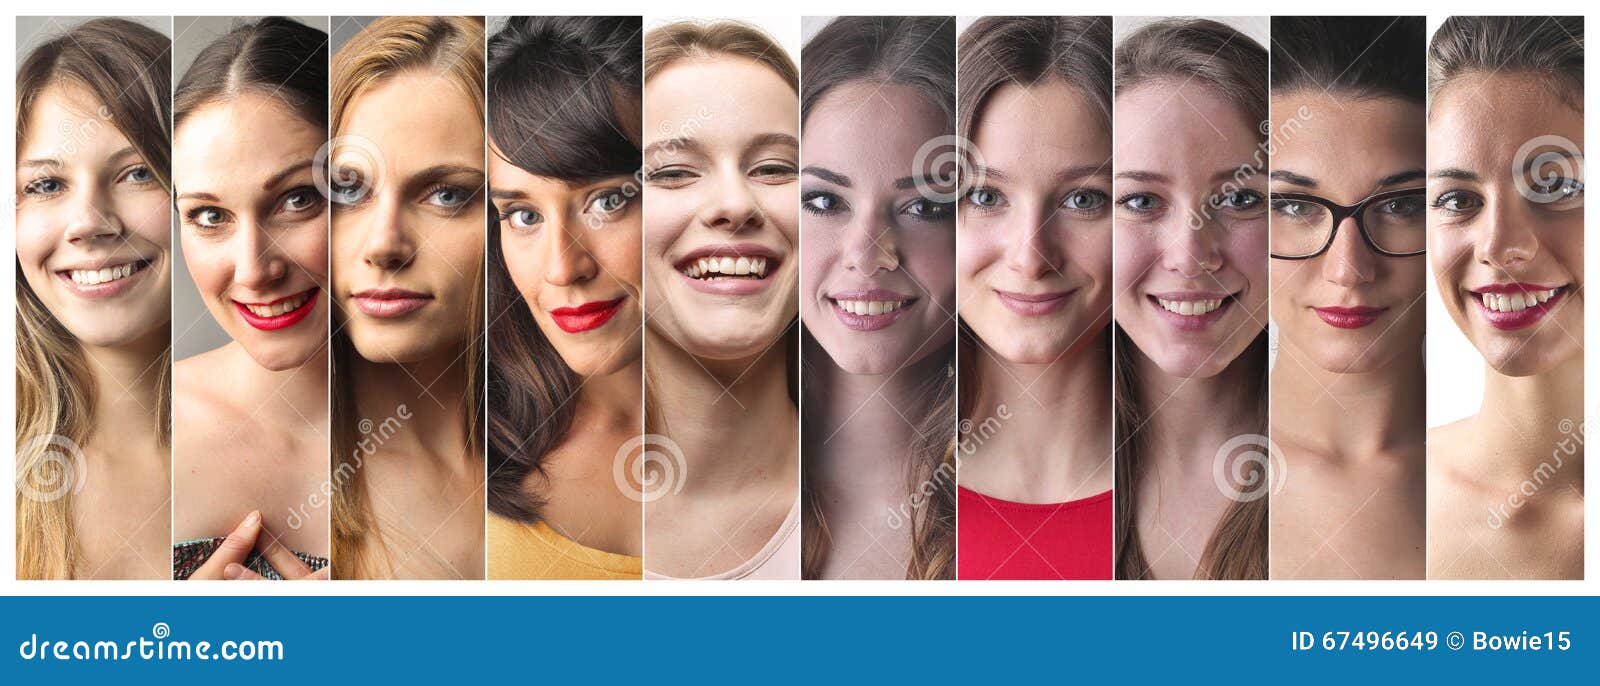 series of women faces